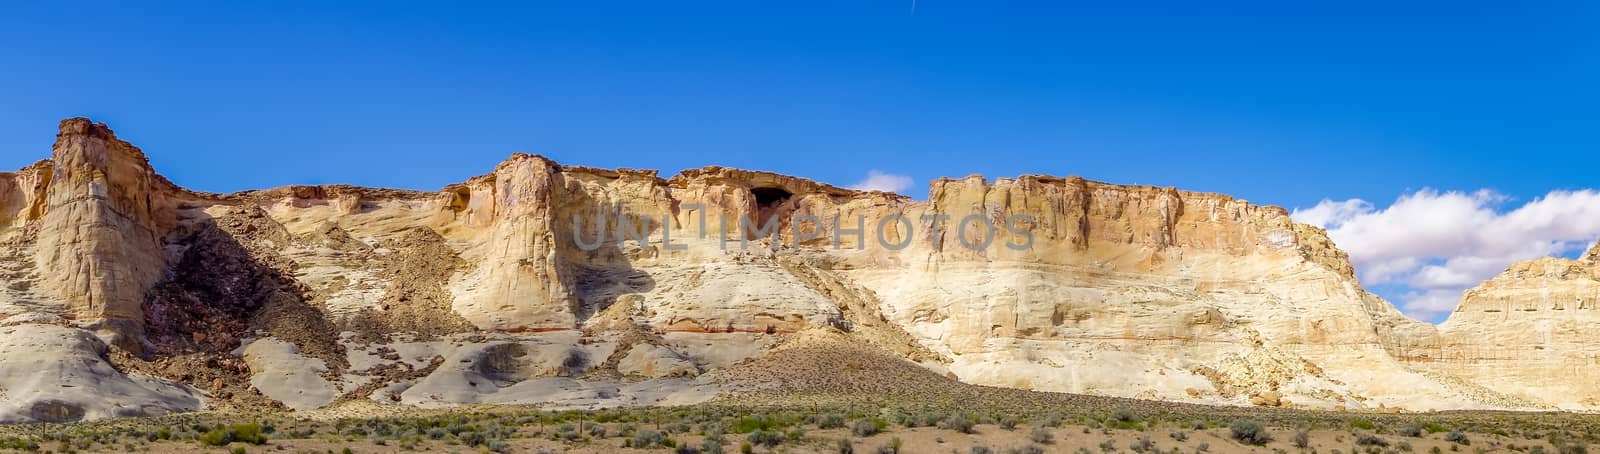 landscape scenes near lake powell and surrounding canyons